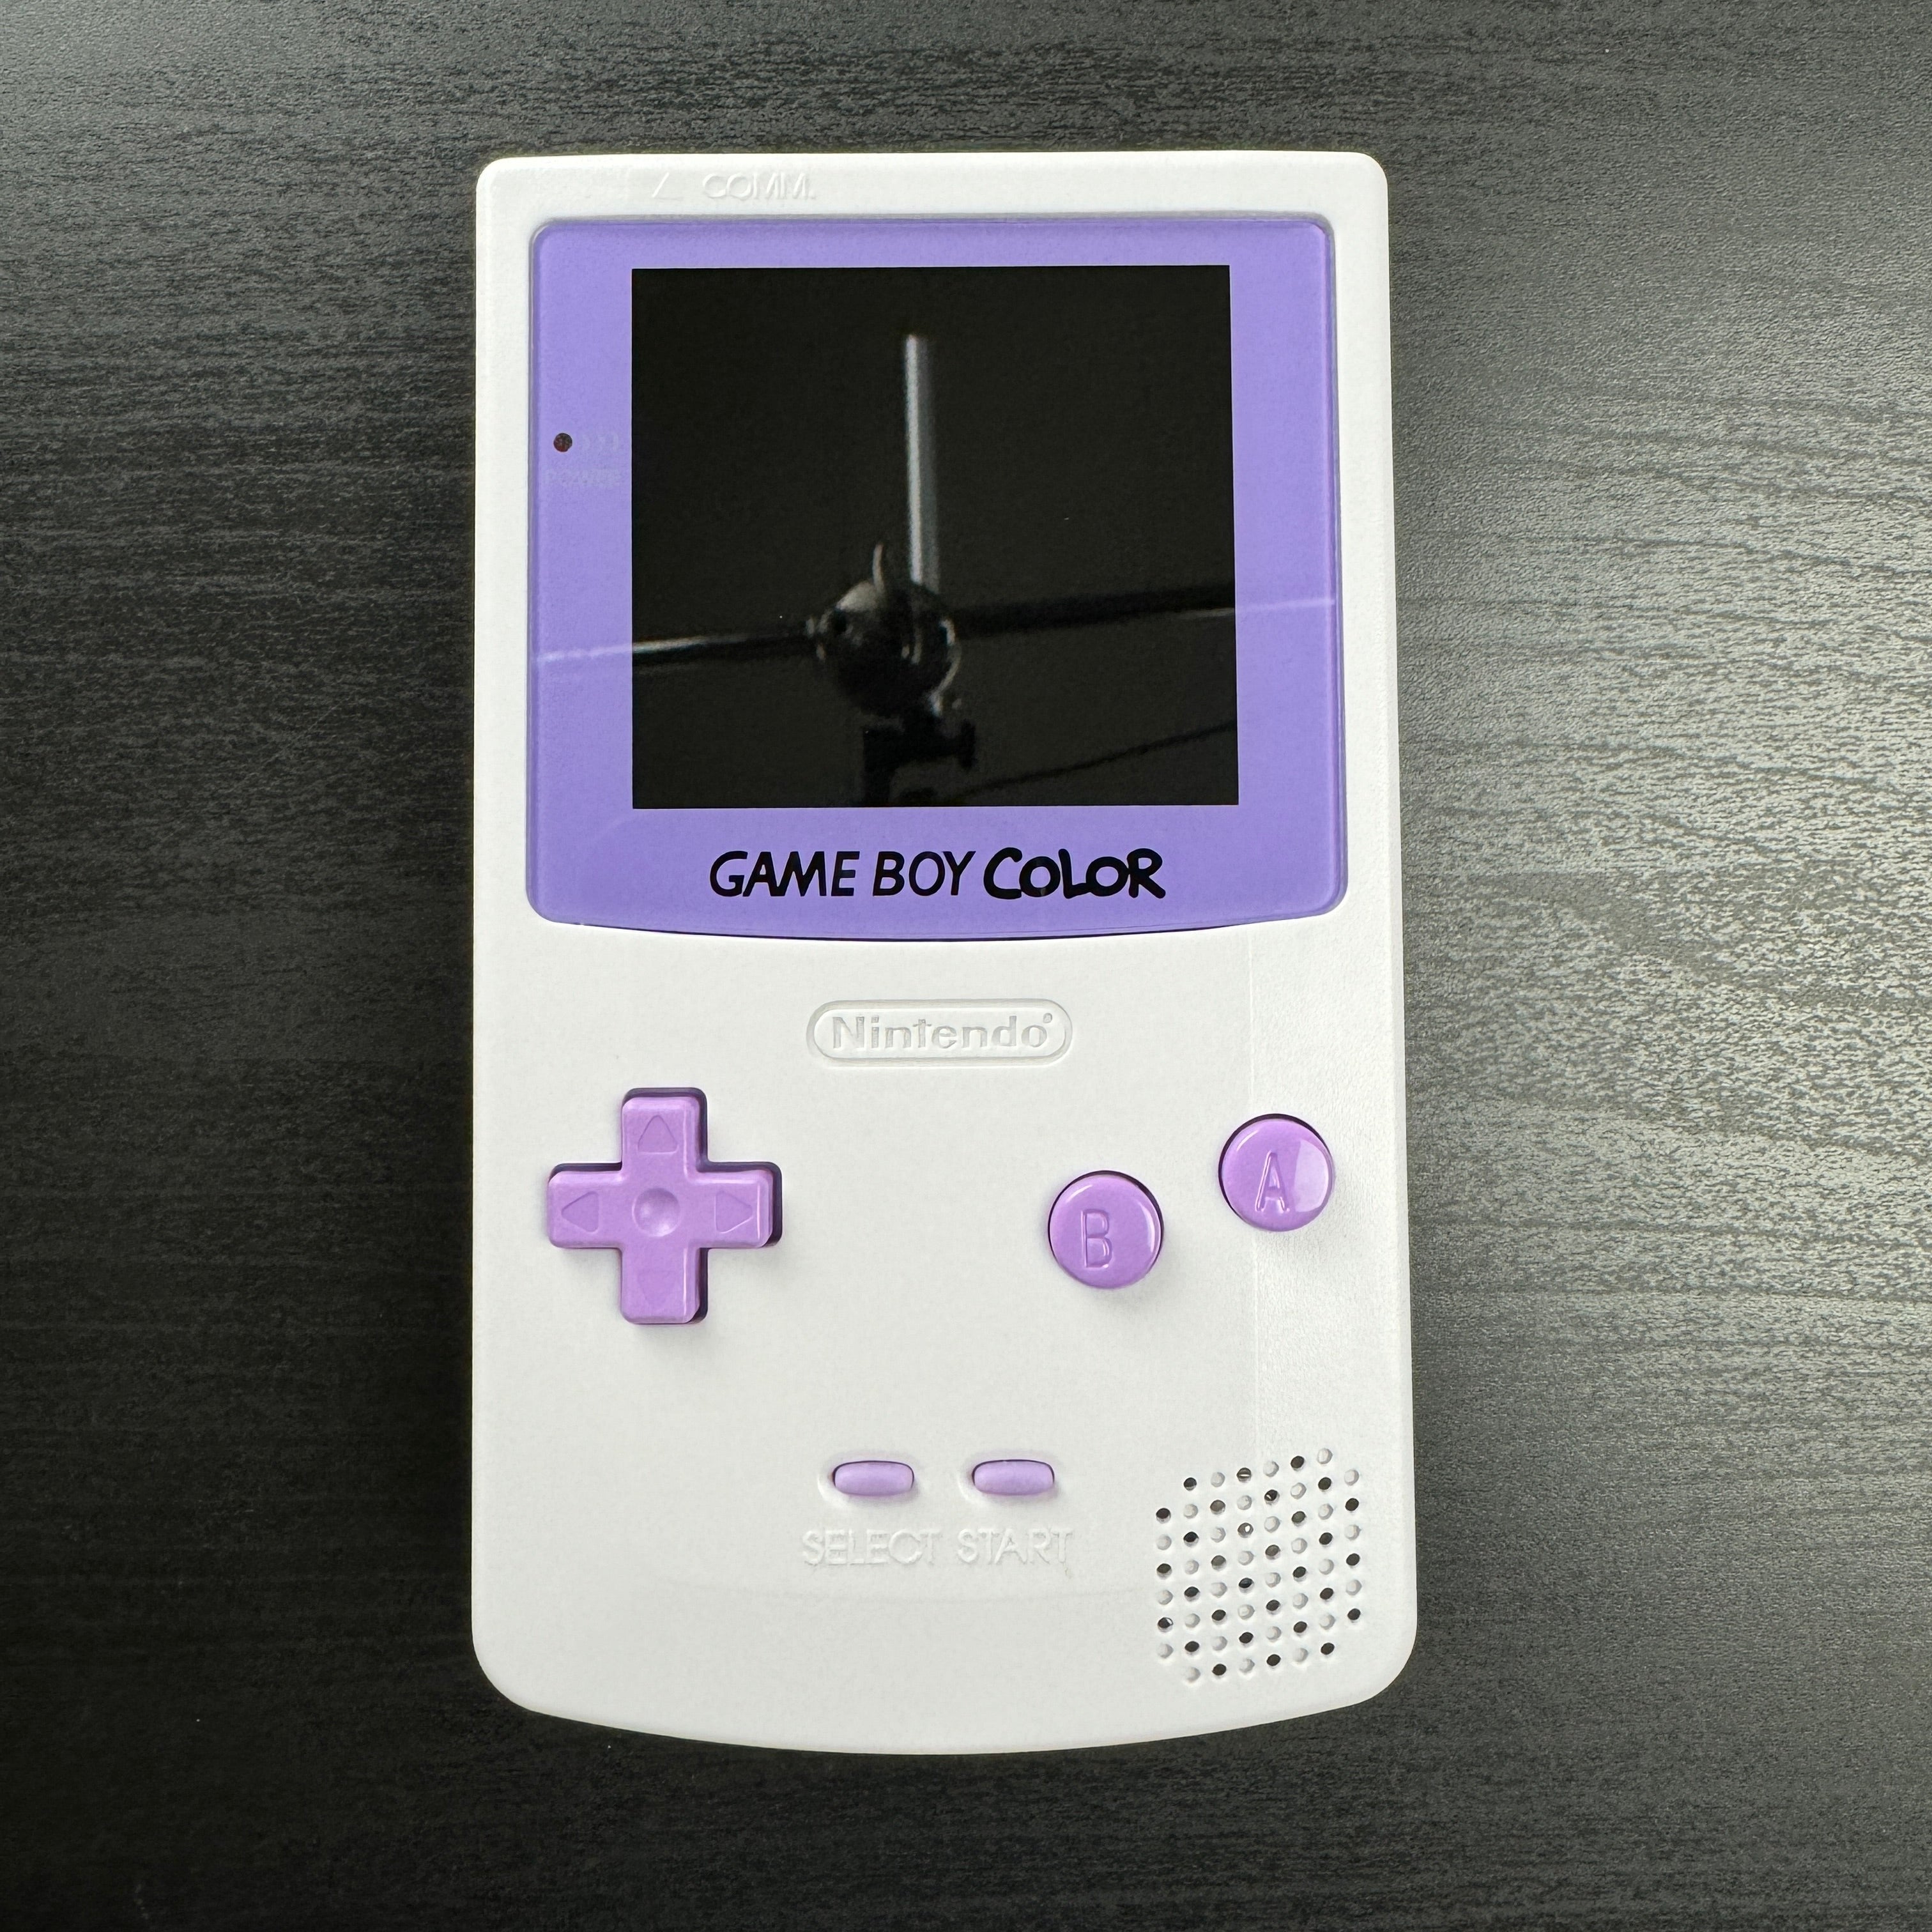 Modded Game Boy Color w/ IPS Display (White and Purple)